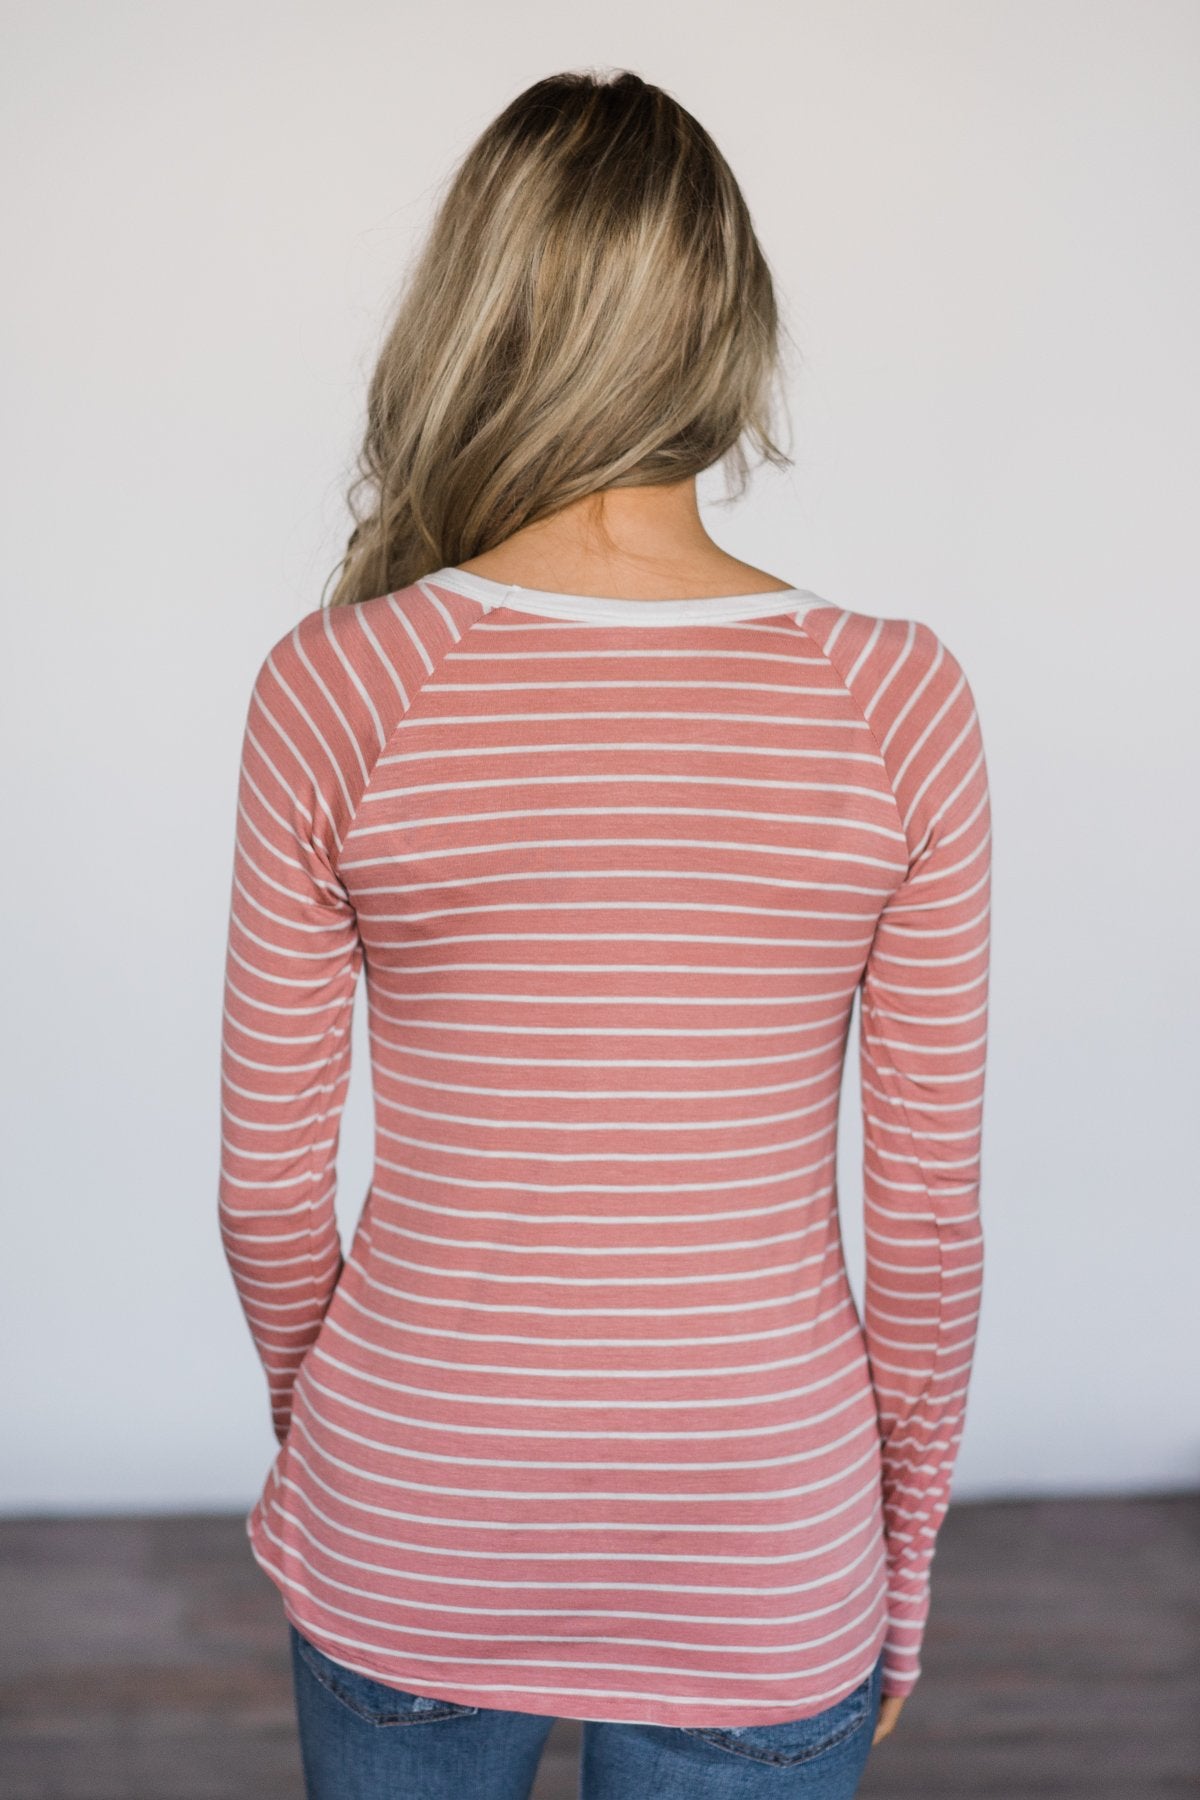 Long Sleeve Rose Striped Top